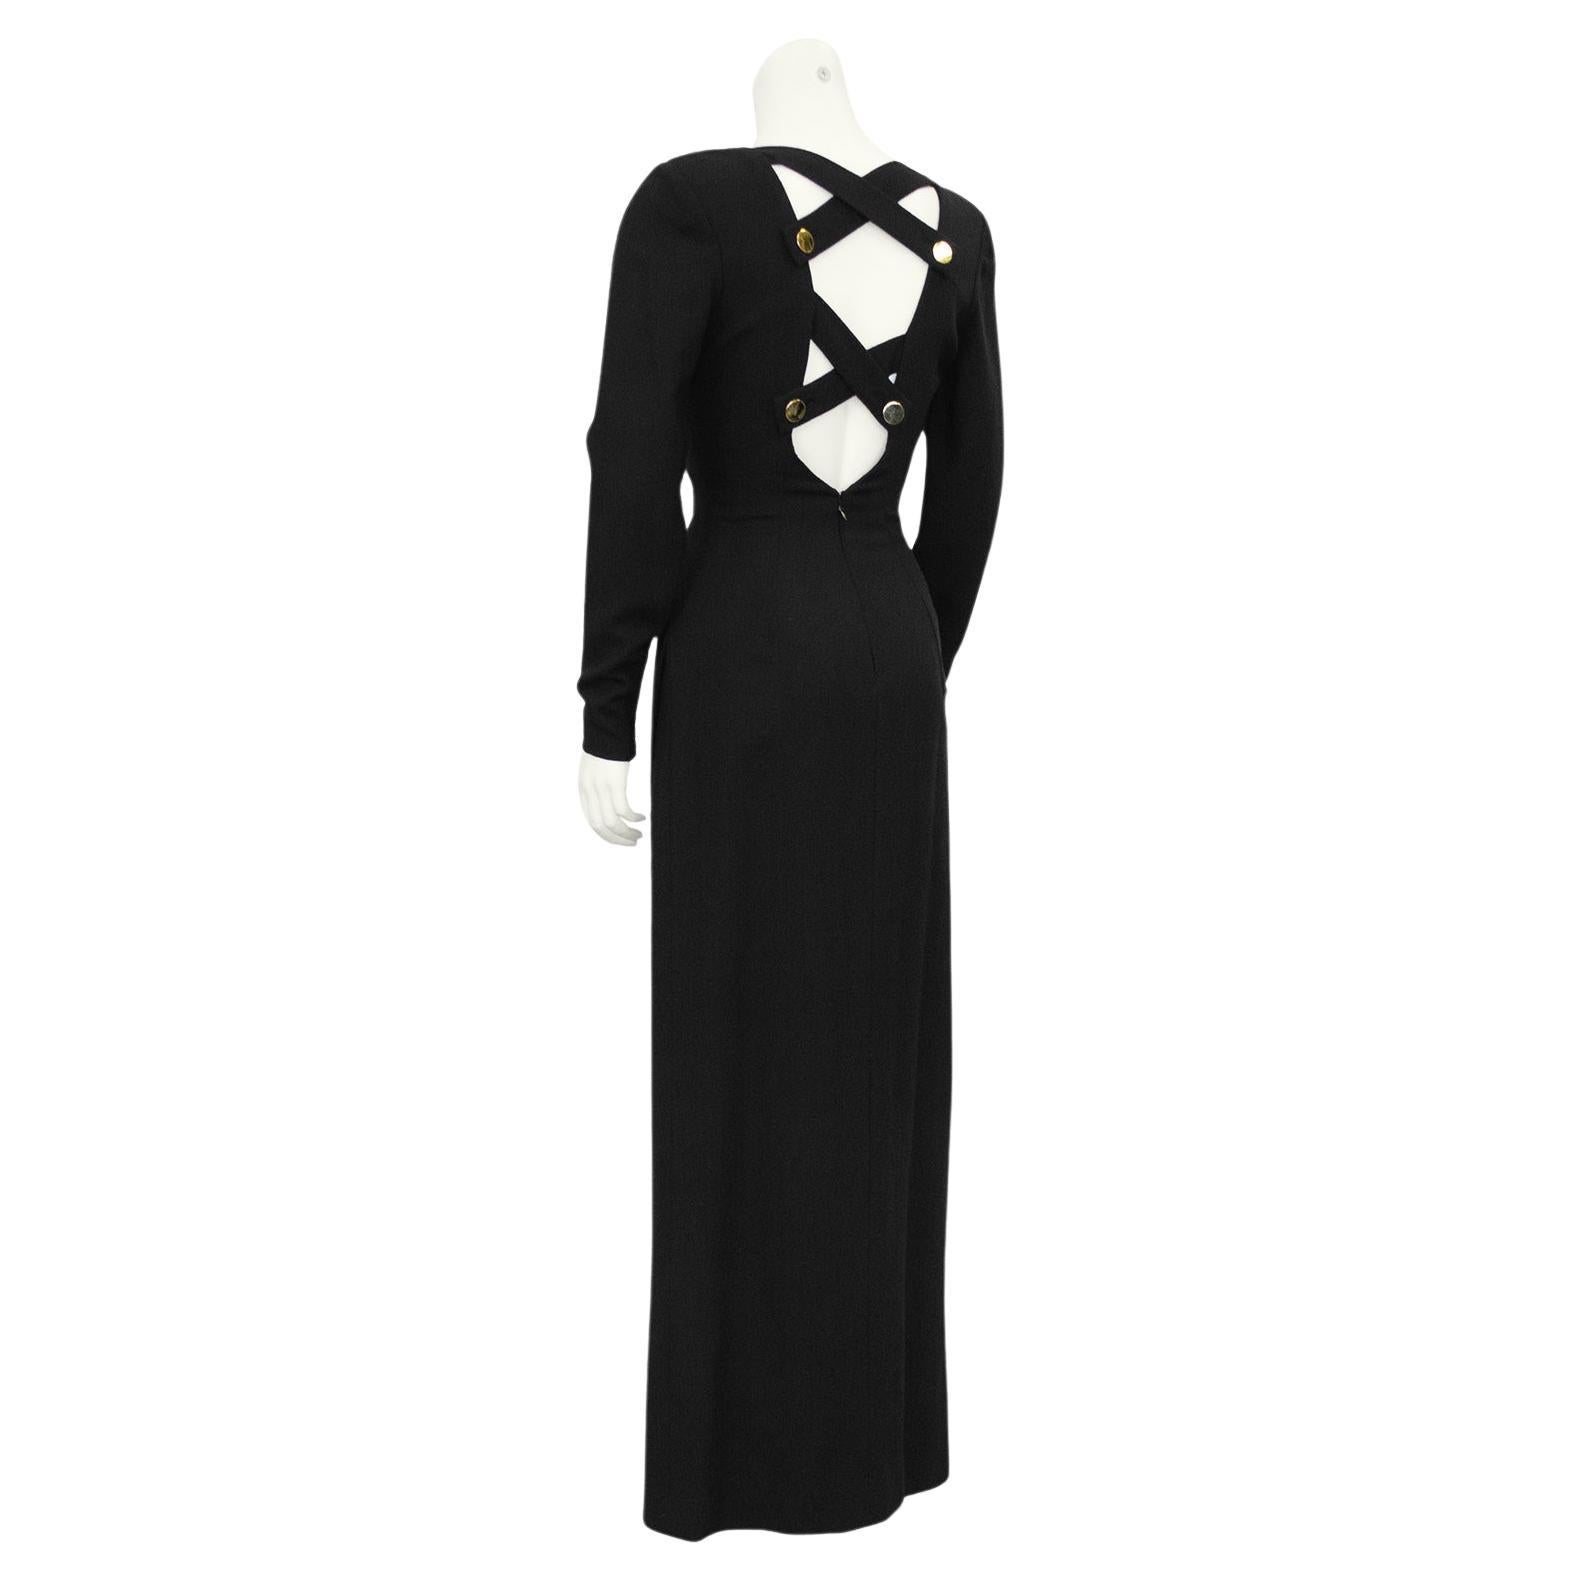 1970s Bill Blass Black Wool Crepe Gown with Cut Out Criss Cross Back  For Sale